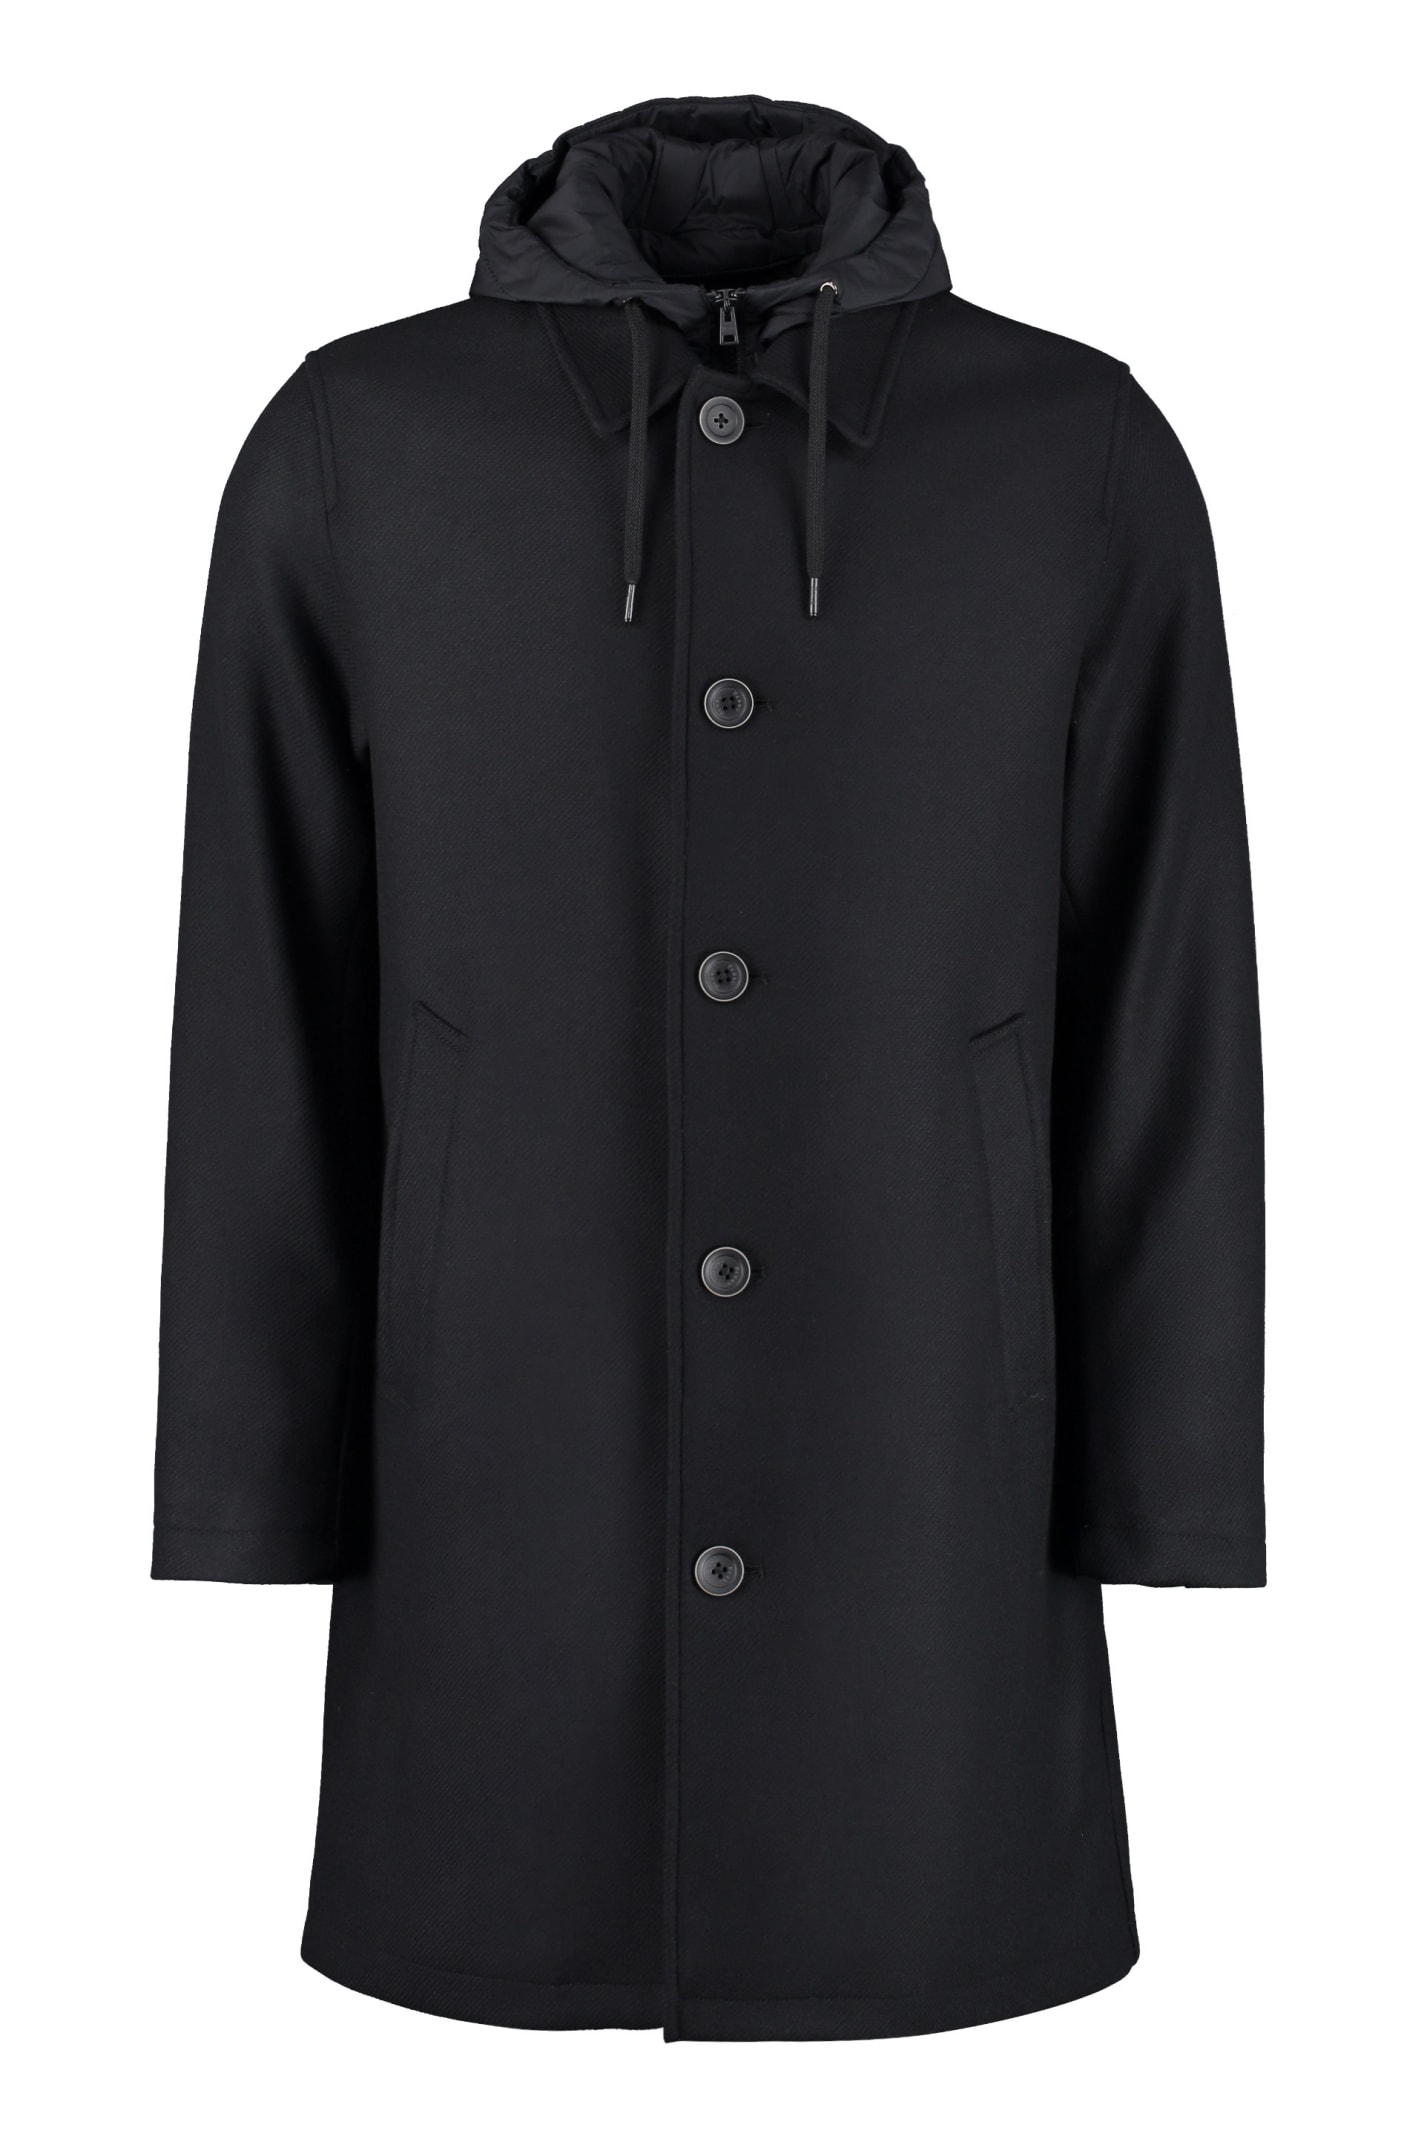 Herno Single-breasted Wool Coat